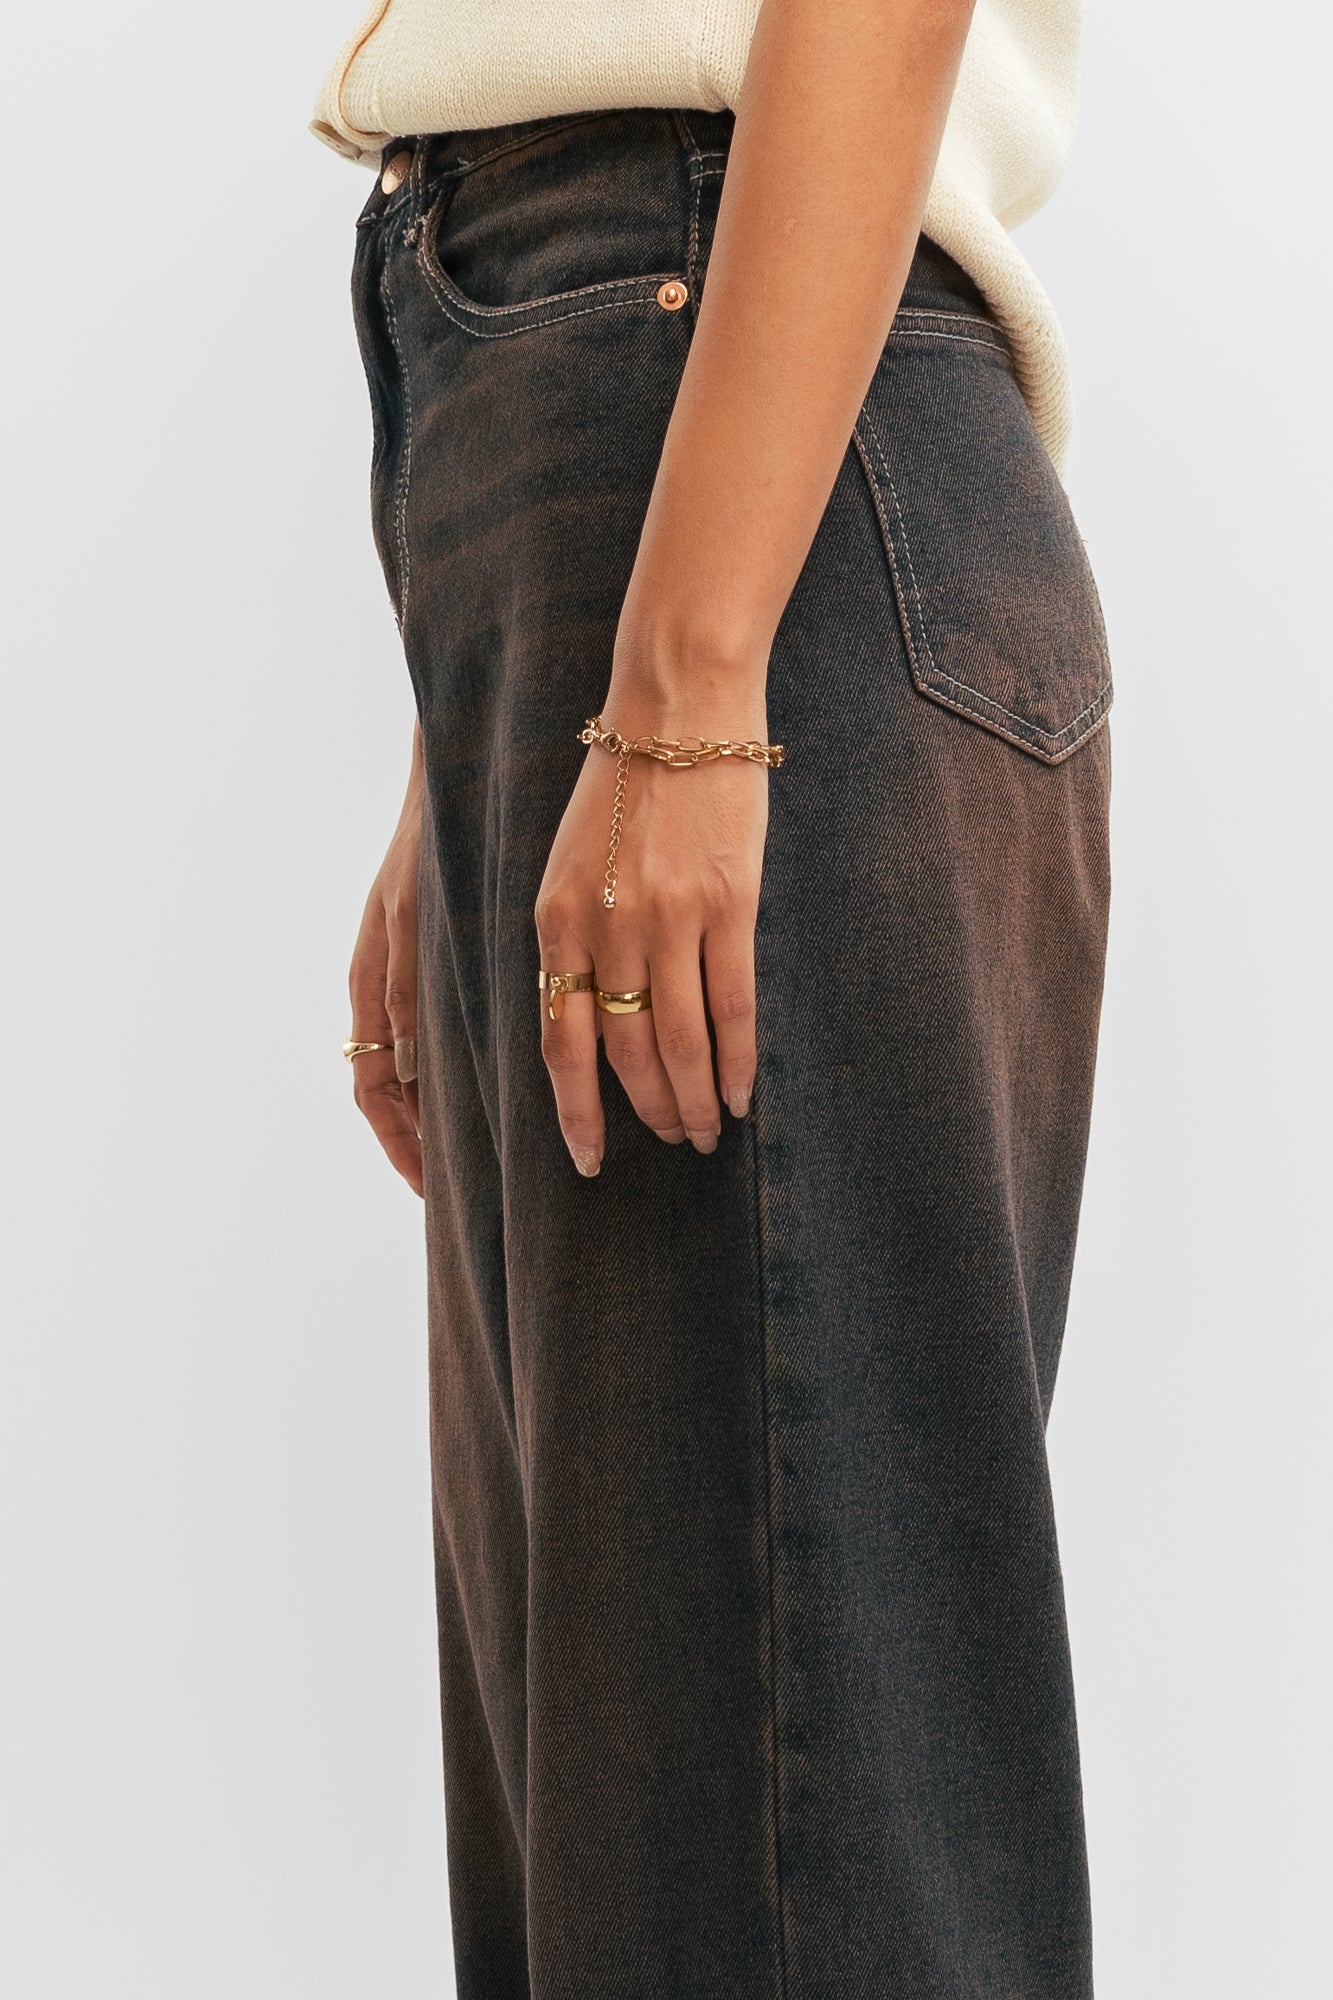 Alternative Cotton Drop Crotch Pants | Ethically made in Nepal – Surya